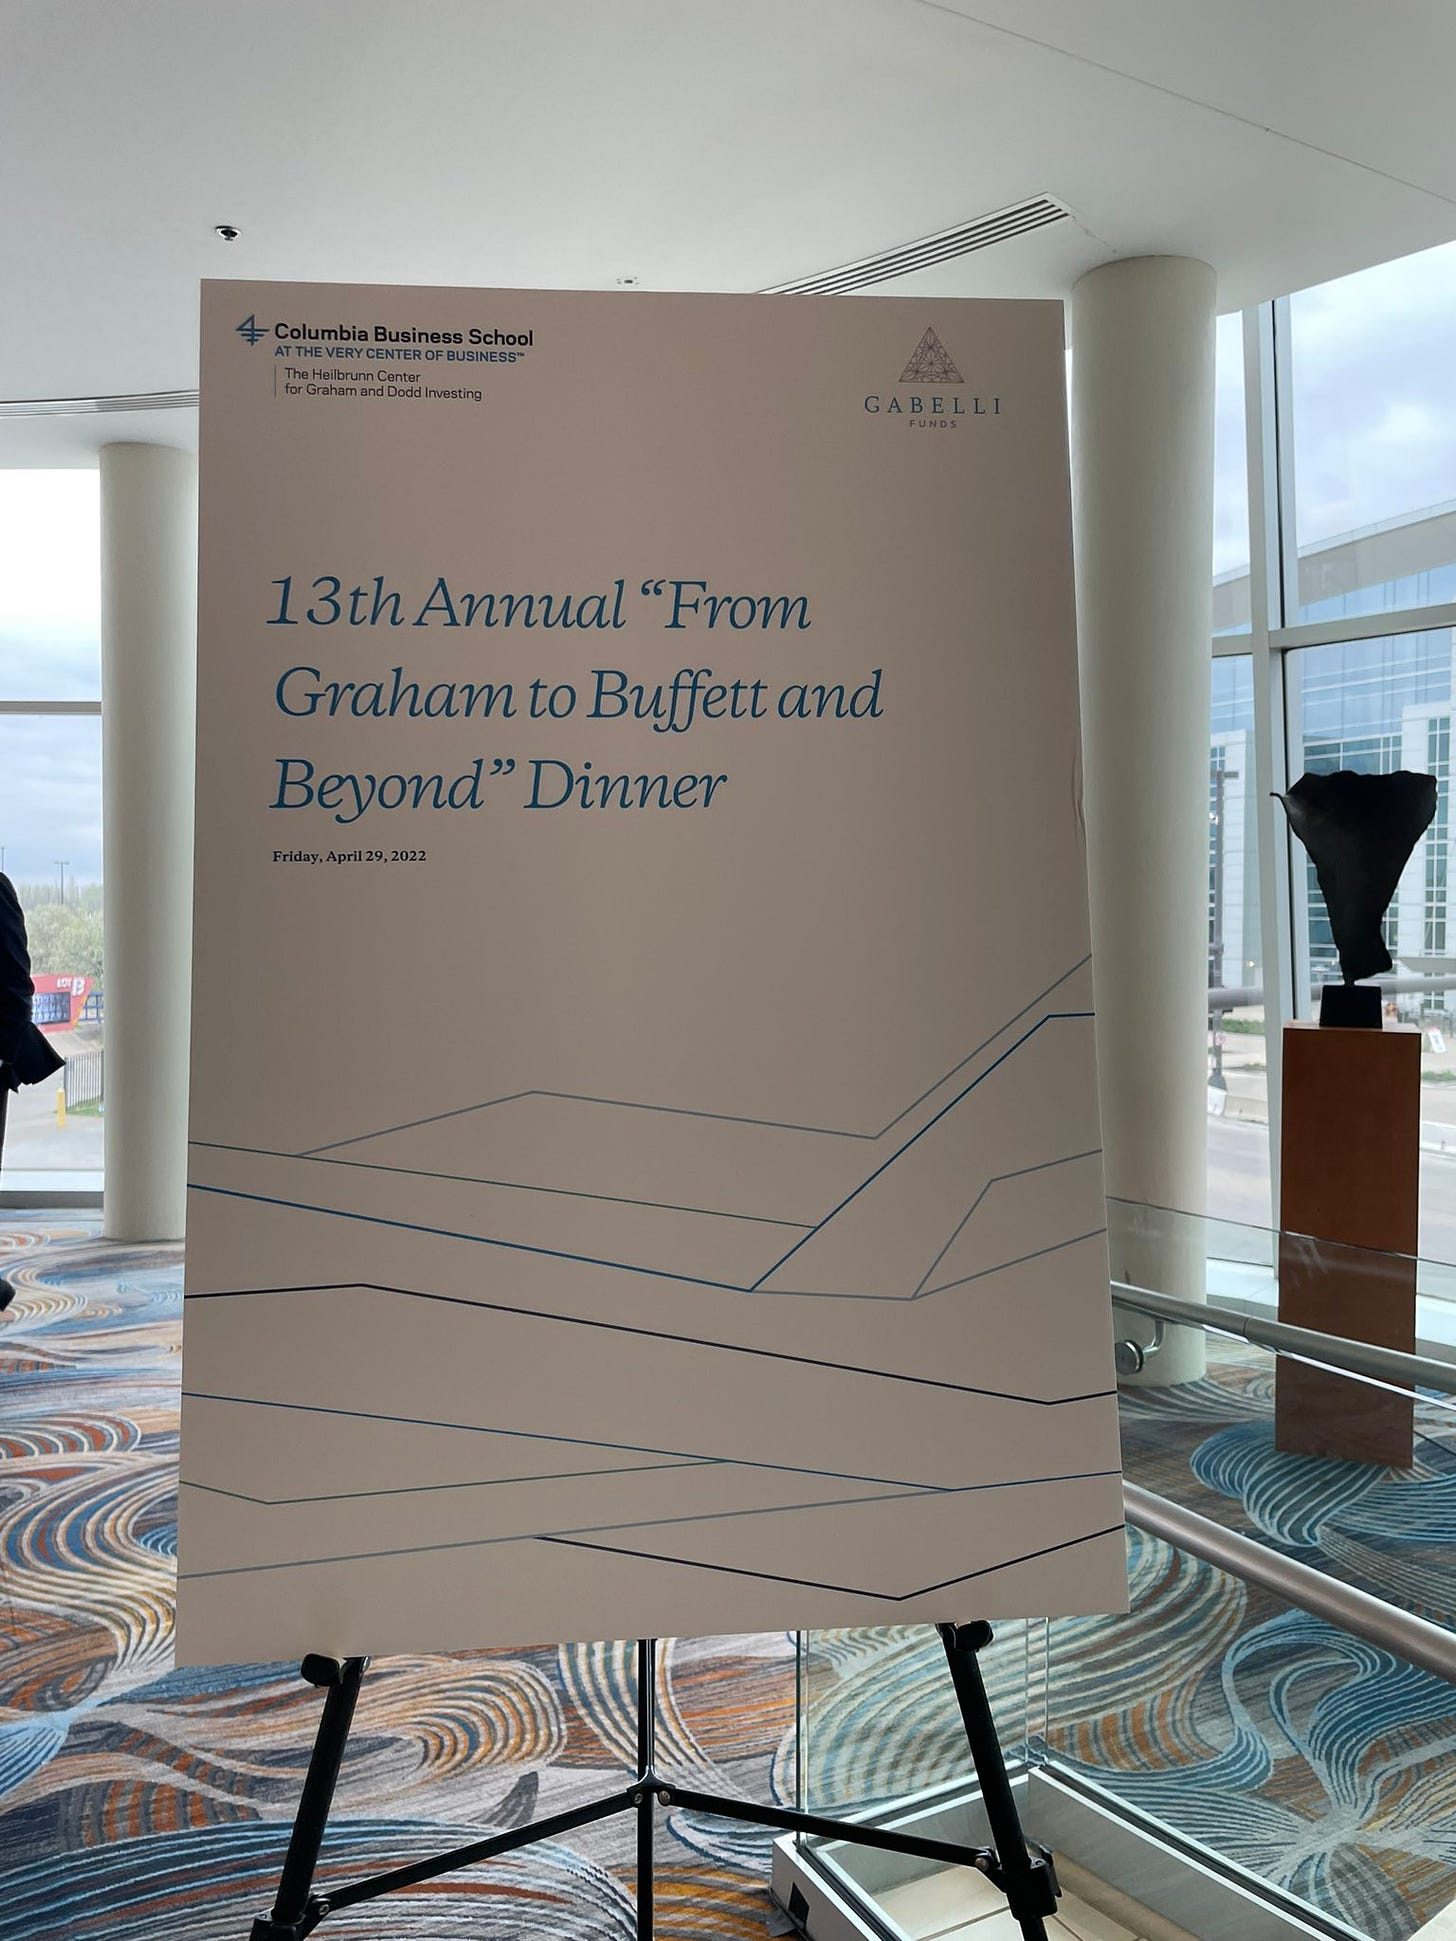 Heilbrunn Center for Graham & Dodd Investing on X: "Great discussion last  night. Looking forward to today's big event https://t.co/g8ckCRH6WZ" / X